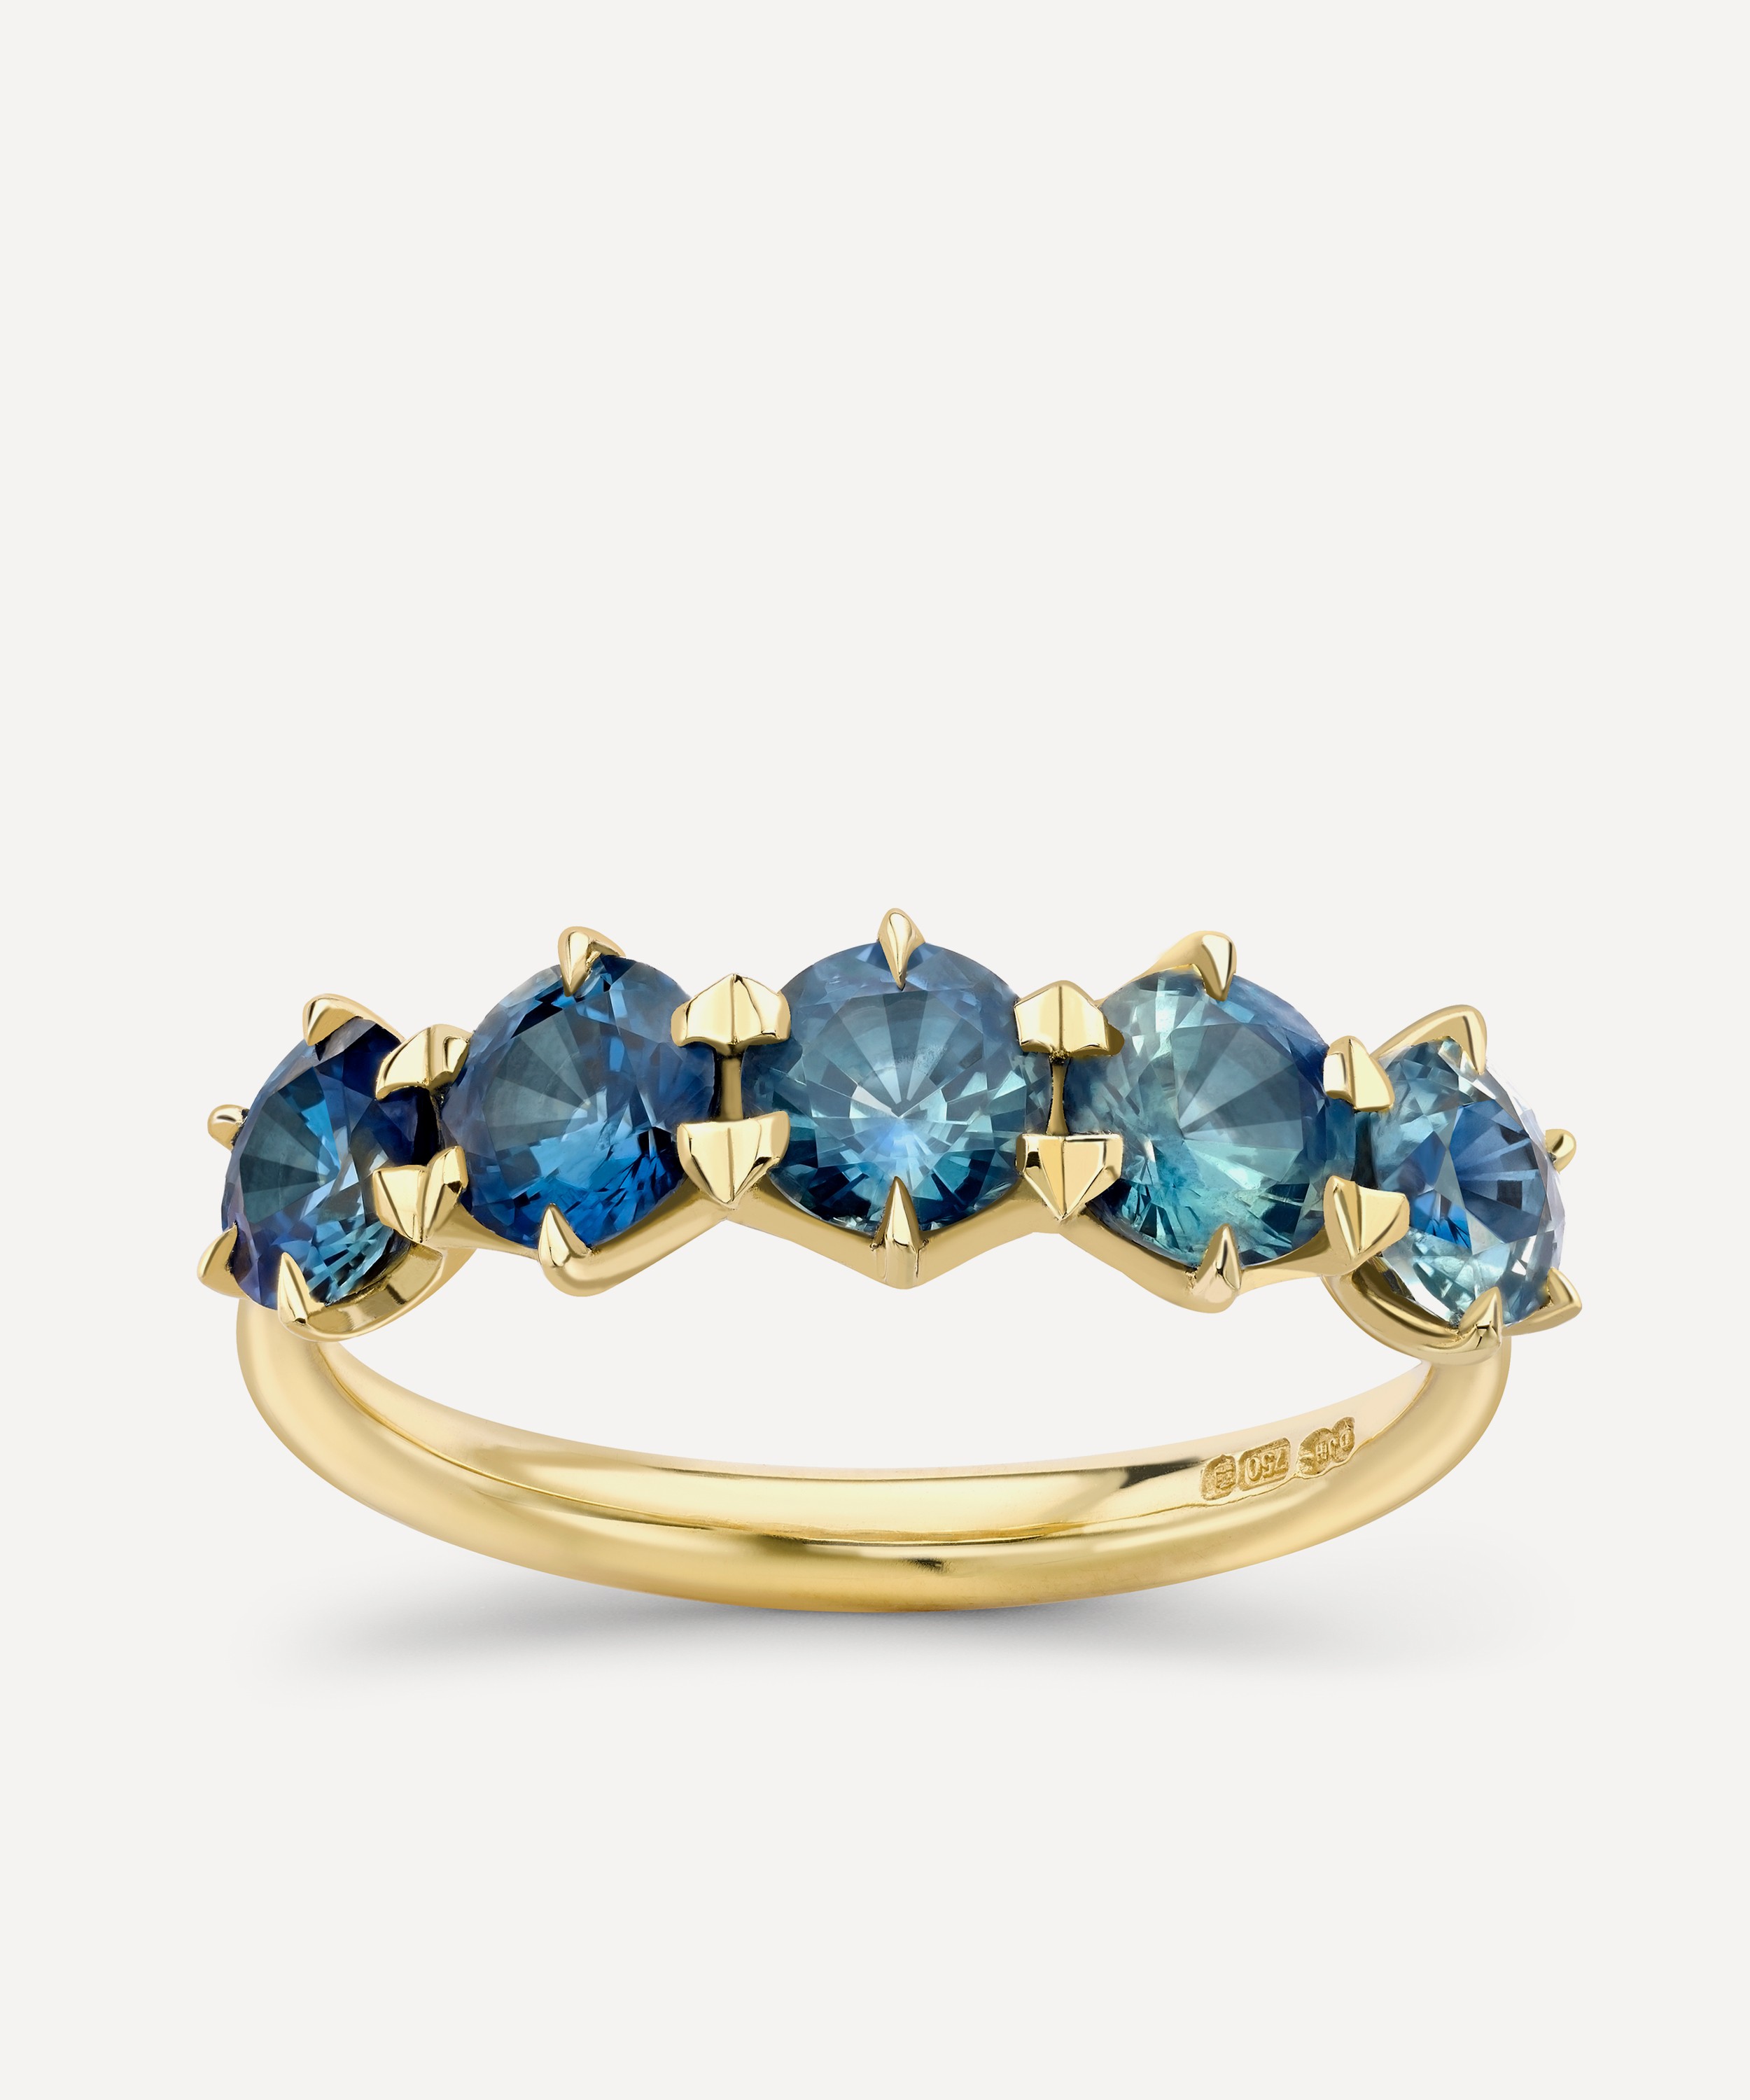 Dinny Hall - 18ct Gold Elyhara Fine Teal Sapphire Five Stone Ring